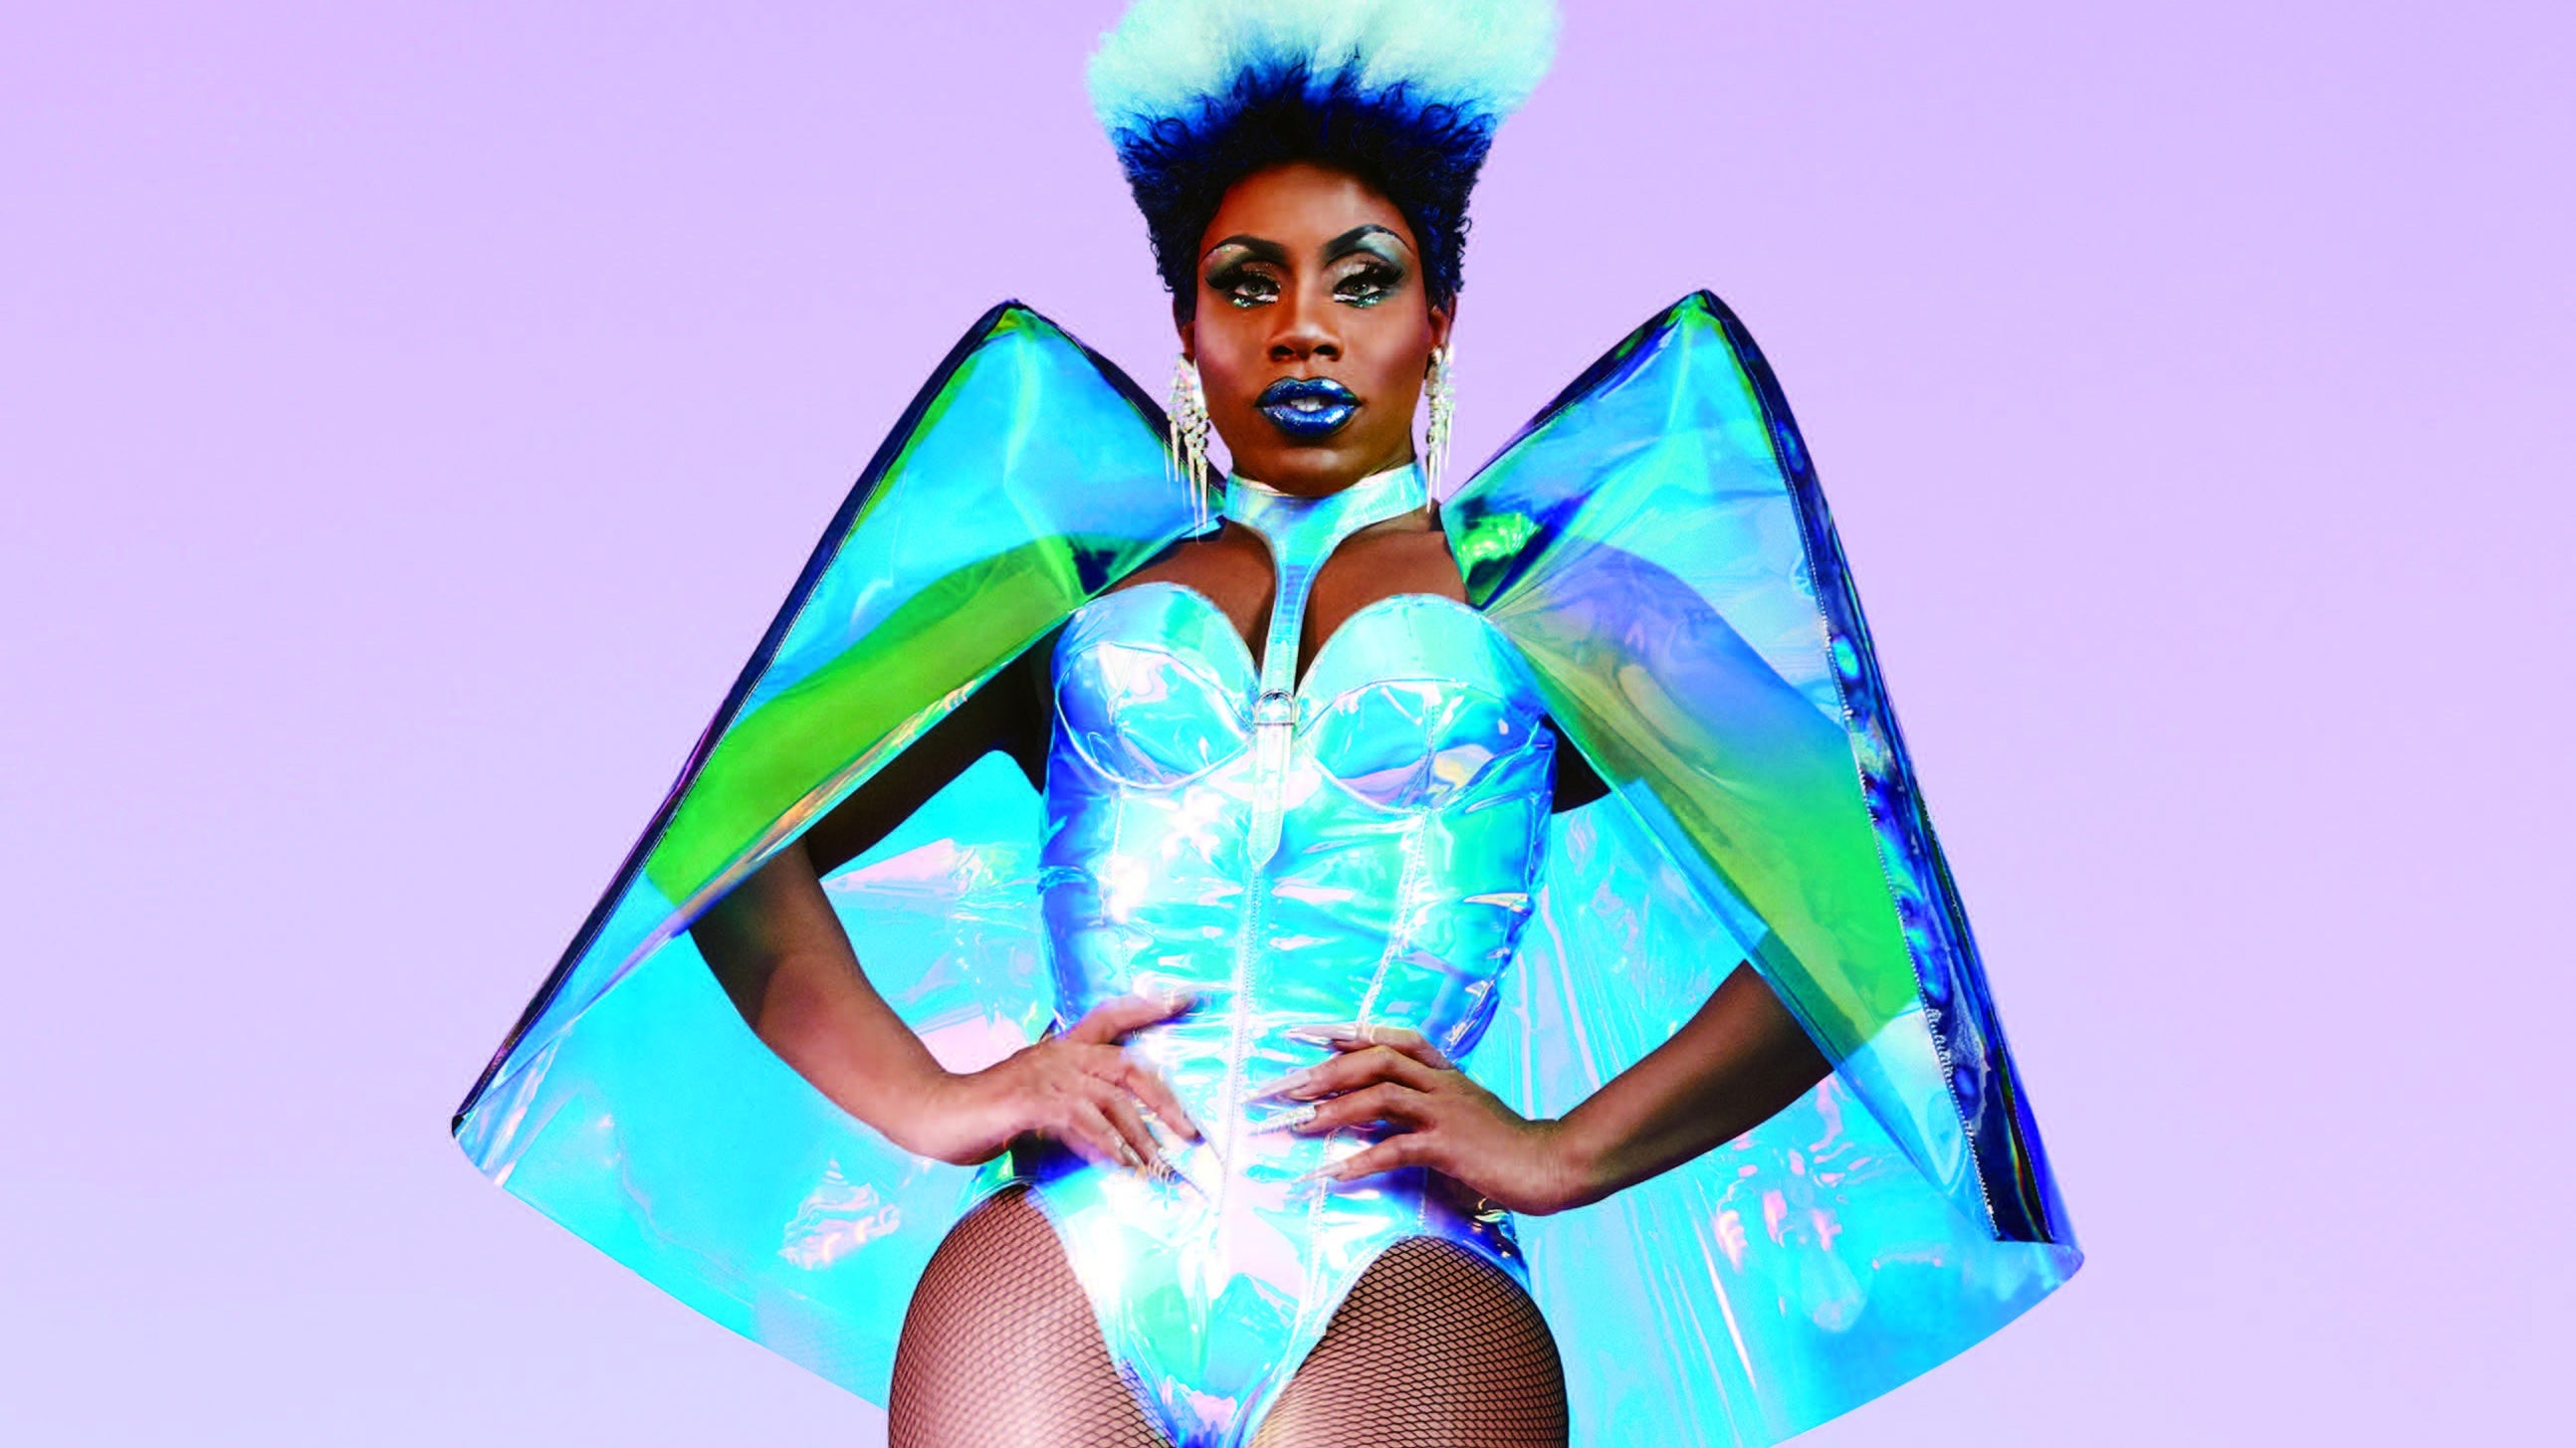 Monét X Change: Life Be Lifin' pre-sale code for show tickets in Boston, MA (The Wilbur)